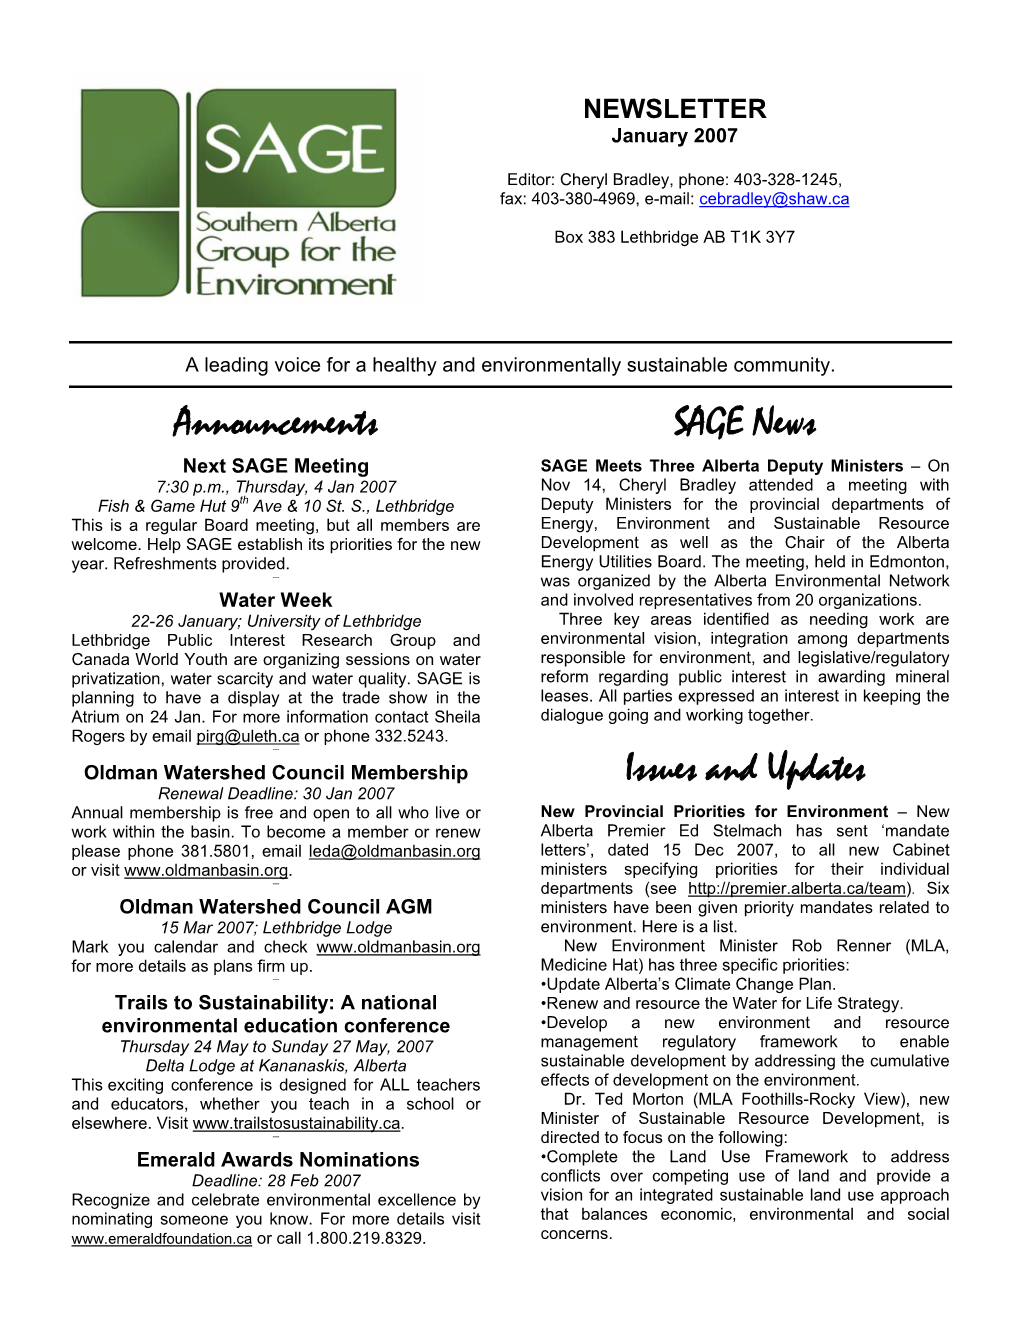 Announcements SAGE News Issues and Updates